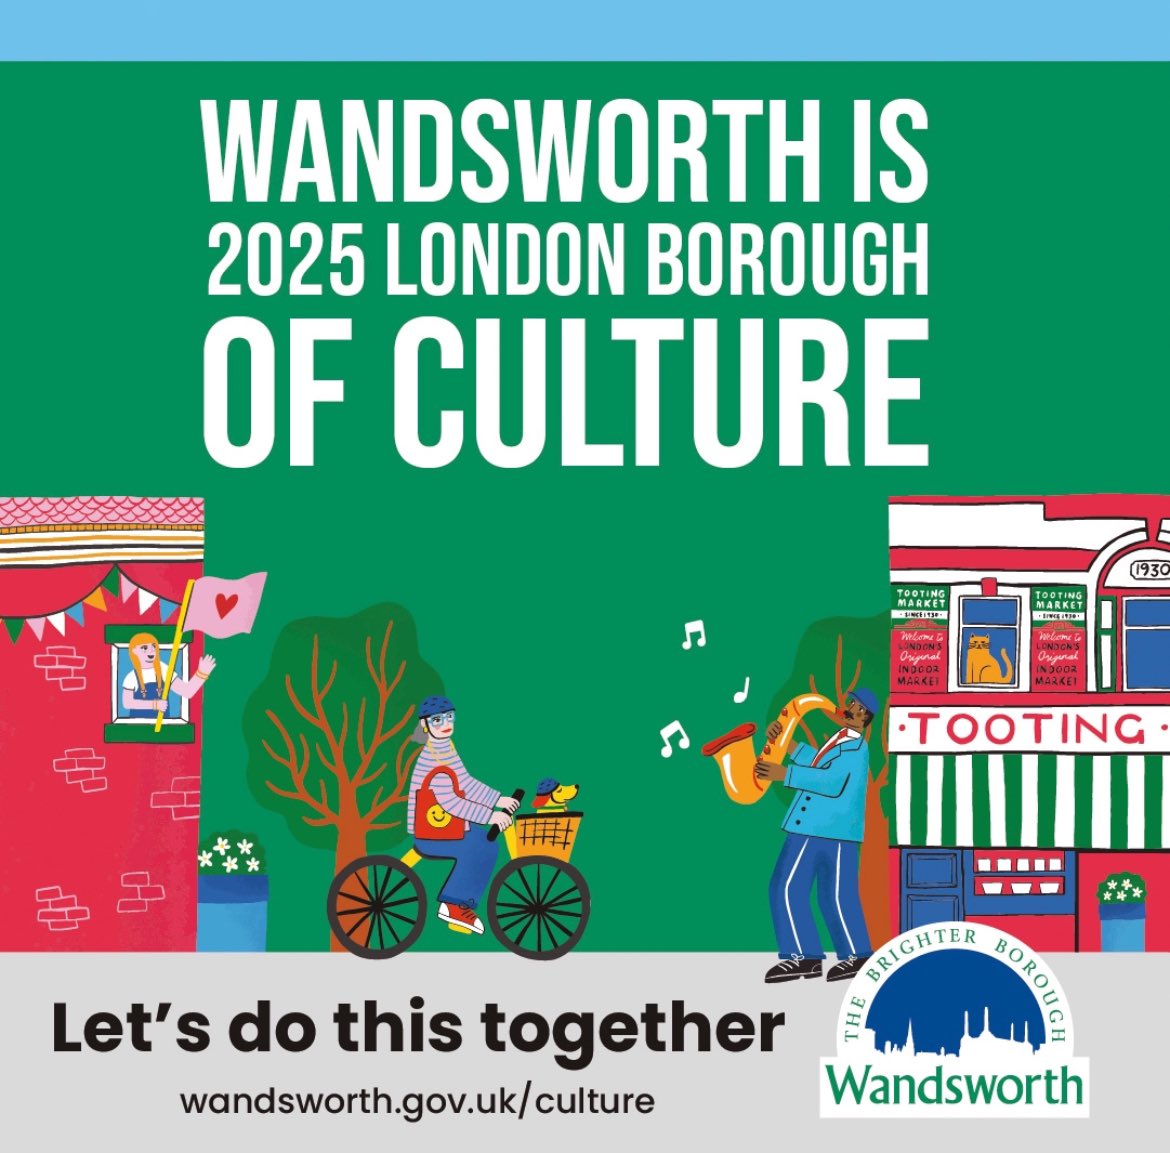 Congratulations, for Wandsworth being chosen as the London Borough of Culture 2025!!! 🎉 #wandsworth #wandsworthcarerscentre #wandsworthcommunity #london #londonboroughofculture